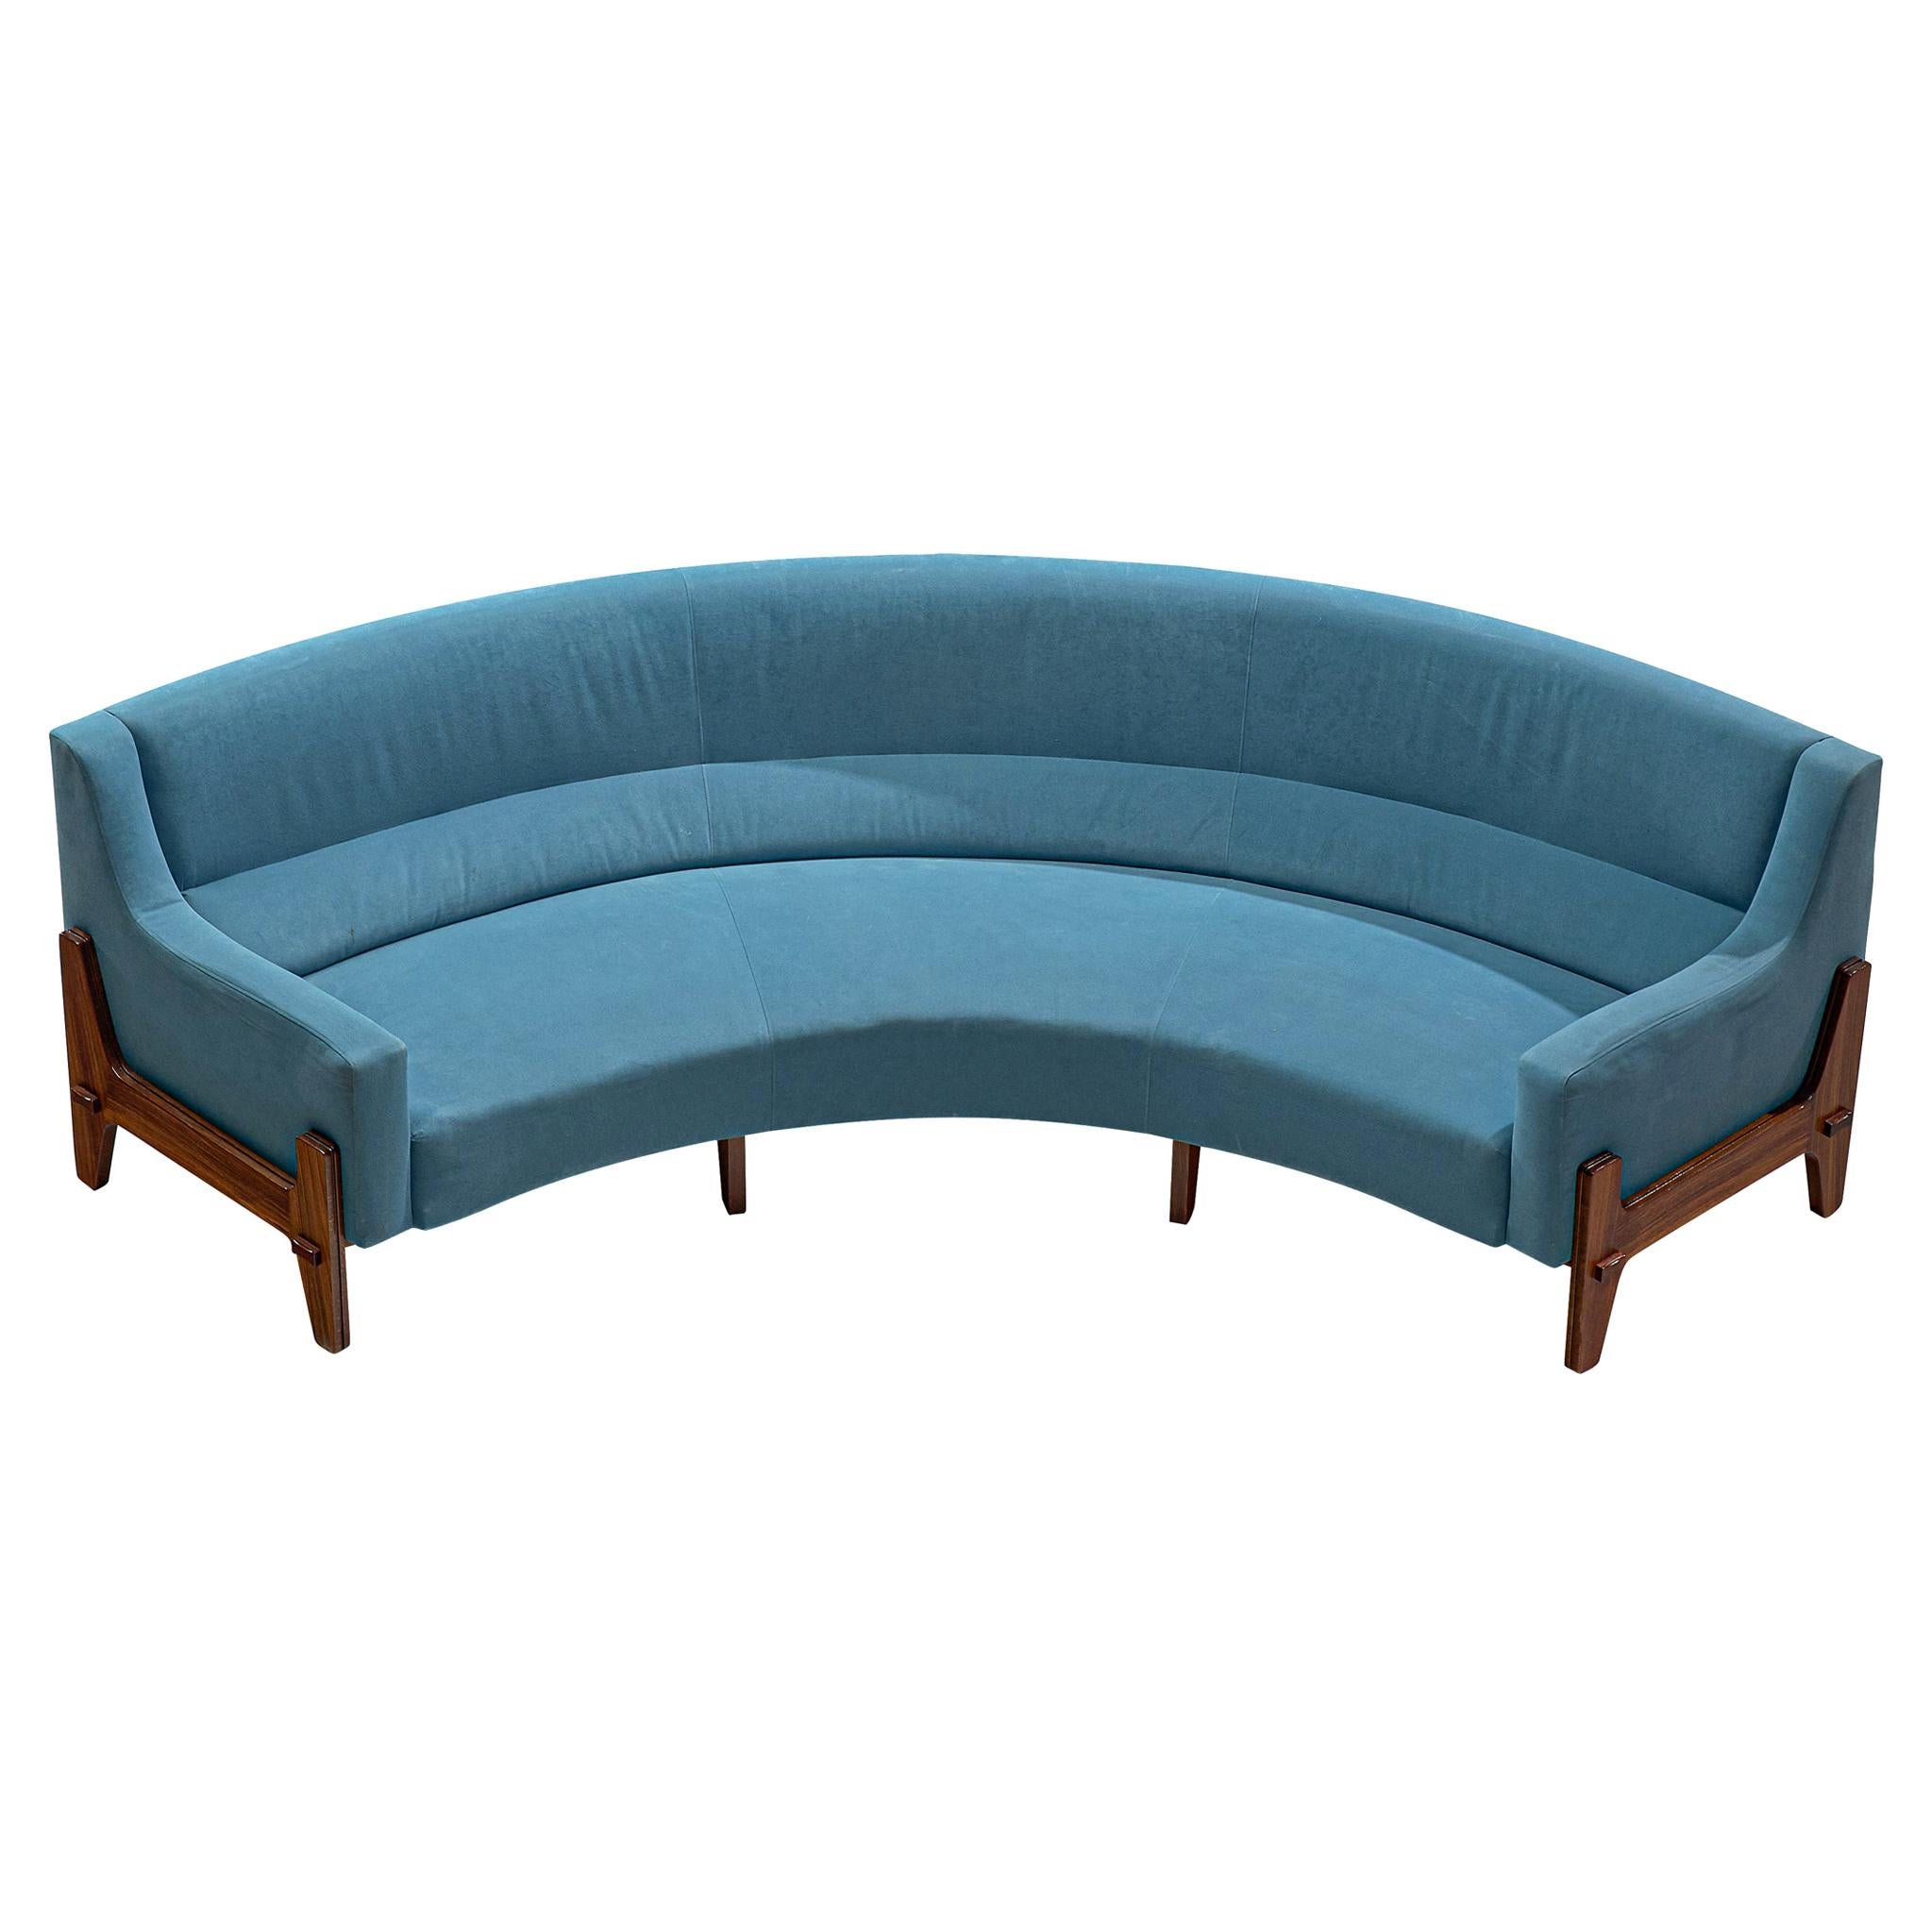 Italian Curved Sofa in Rosewood and Sky Blue Upholstery